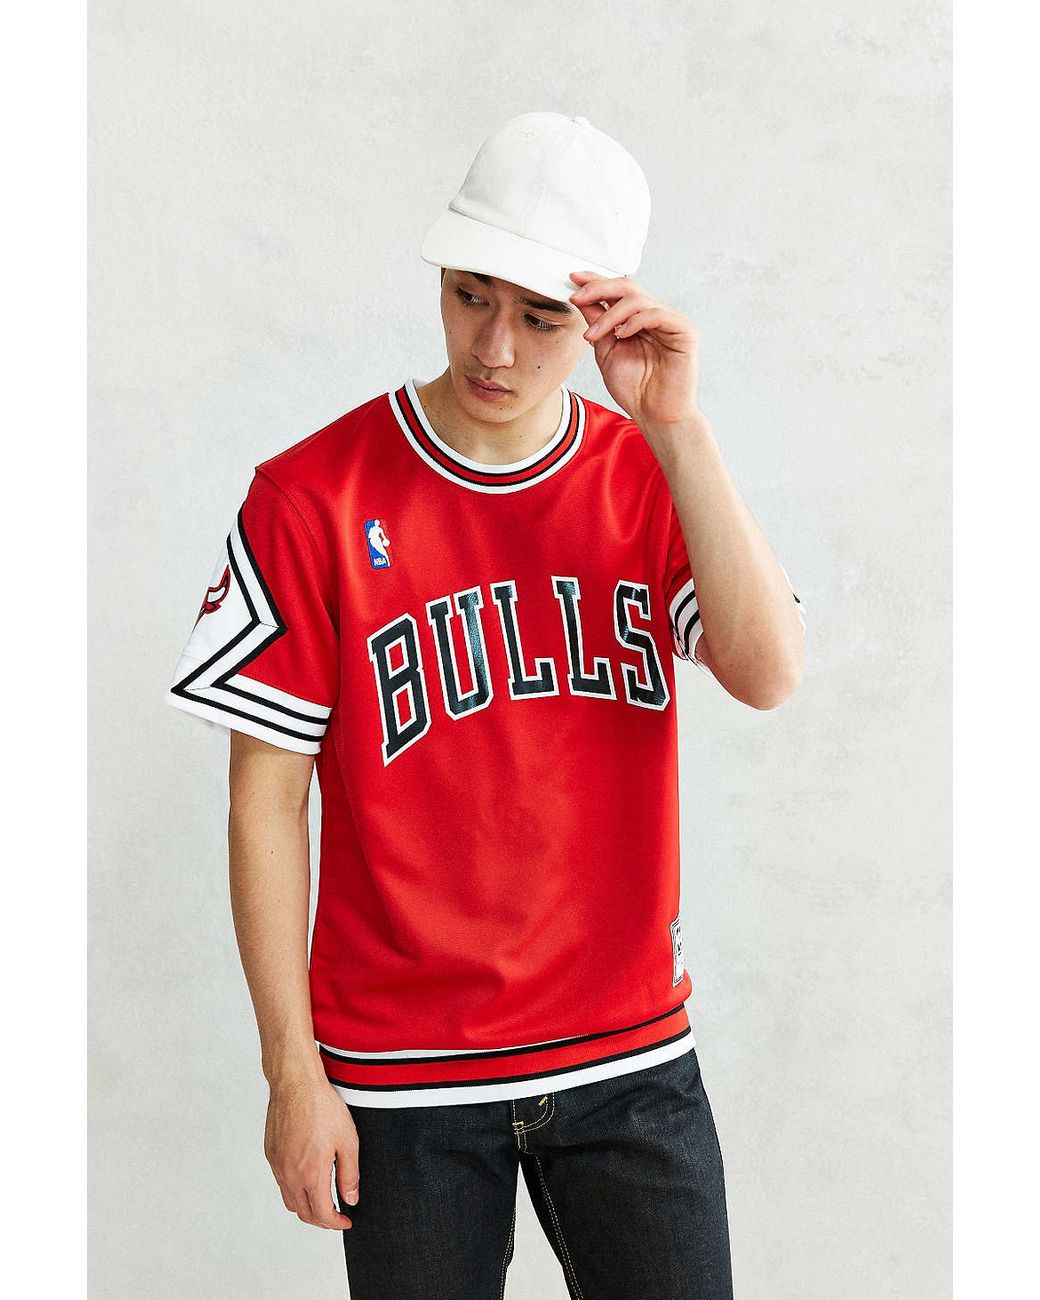 Authentic Chicago Bulls 1997 Shooting Shirt - Shop Mitchell & Ness  Authentic Jerseys and Replicas Mitchell & Ness Nostalgia Co.